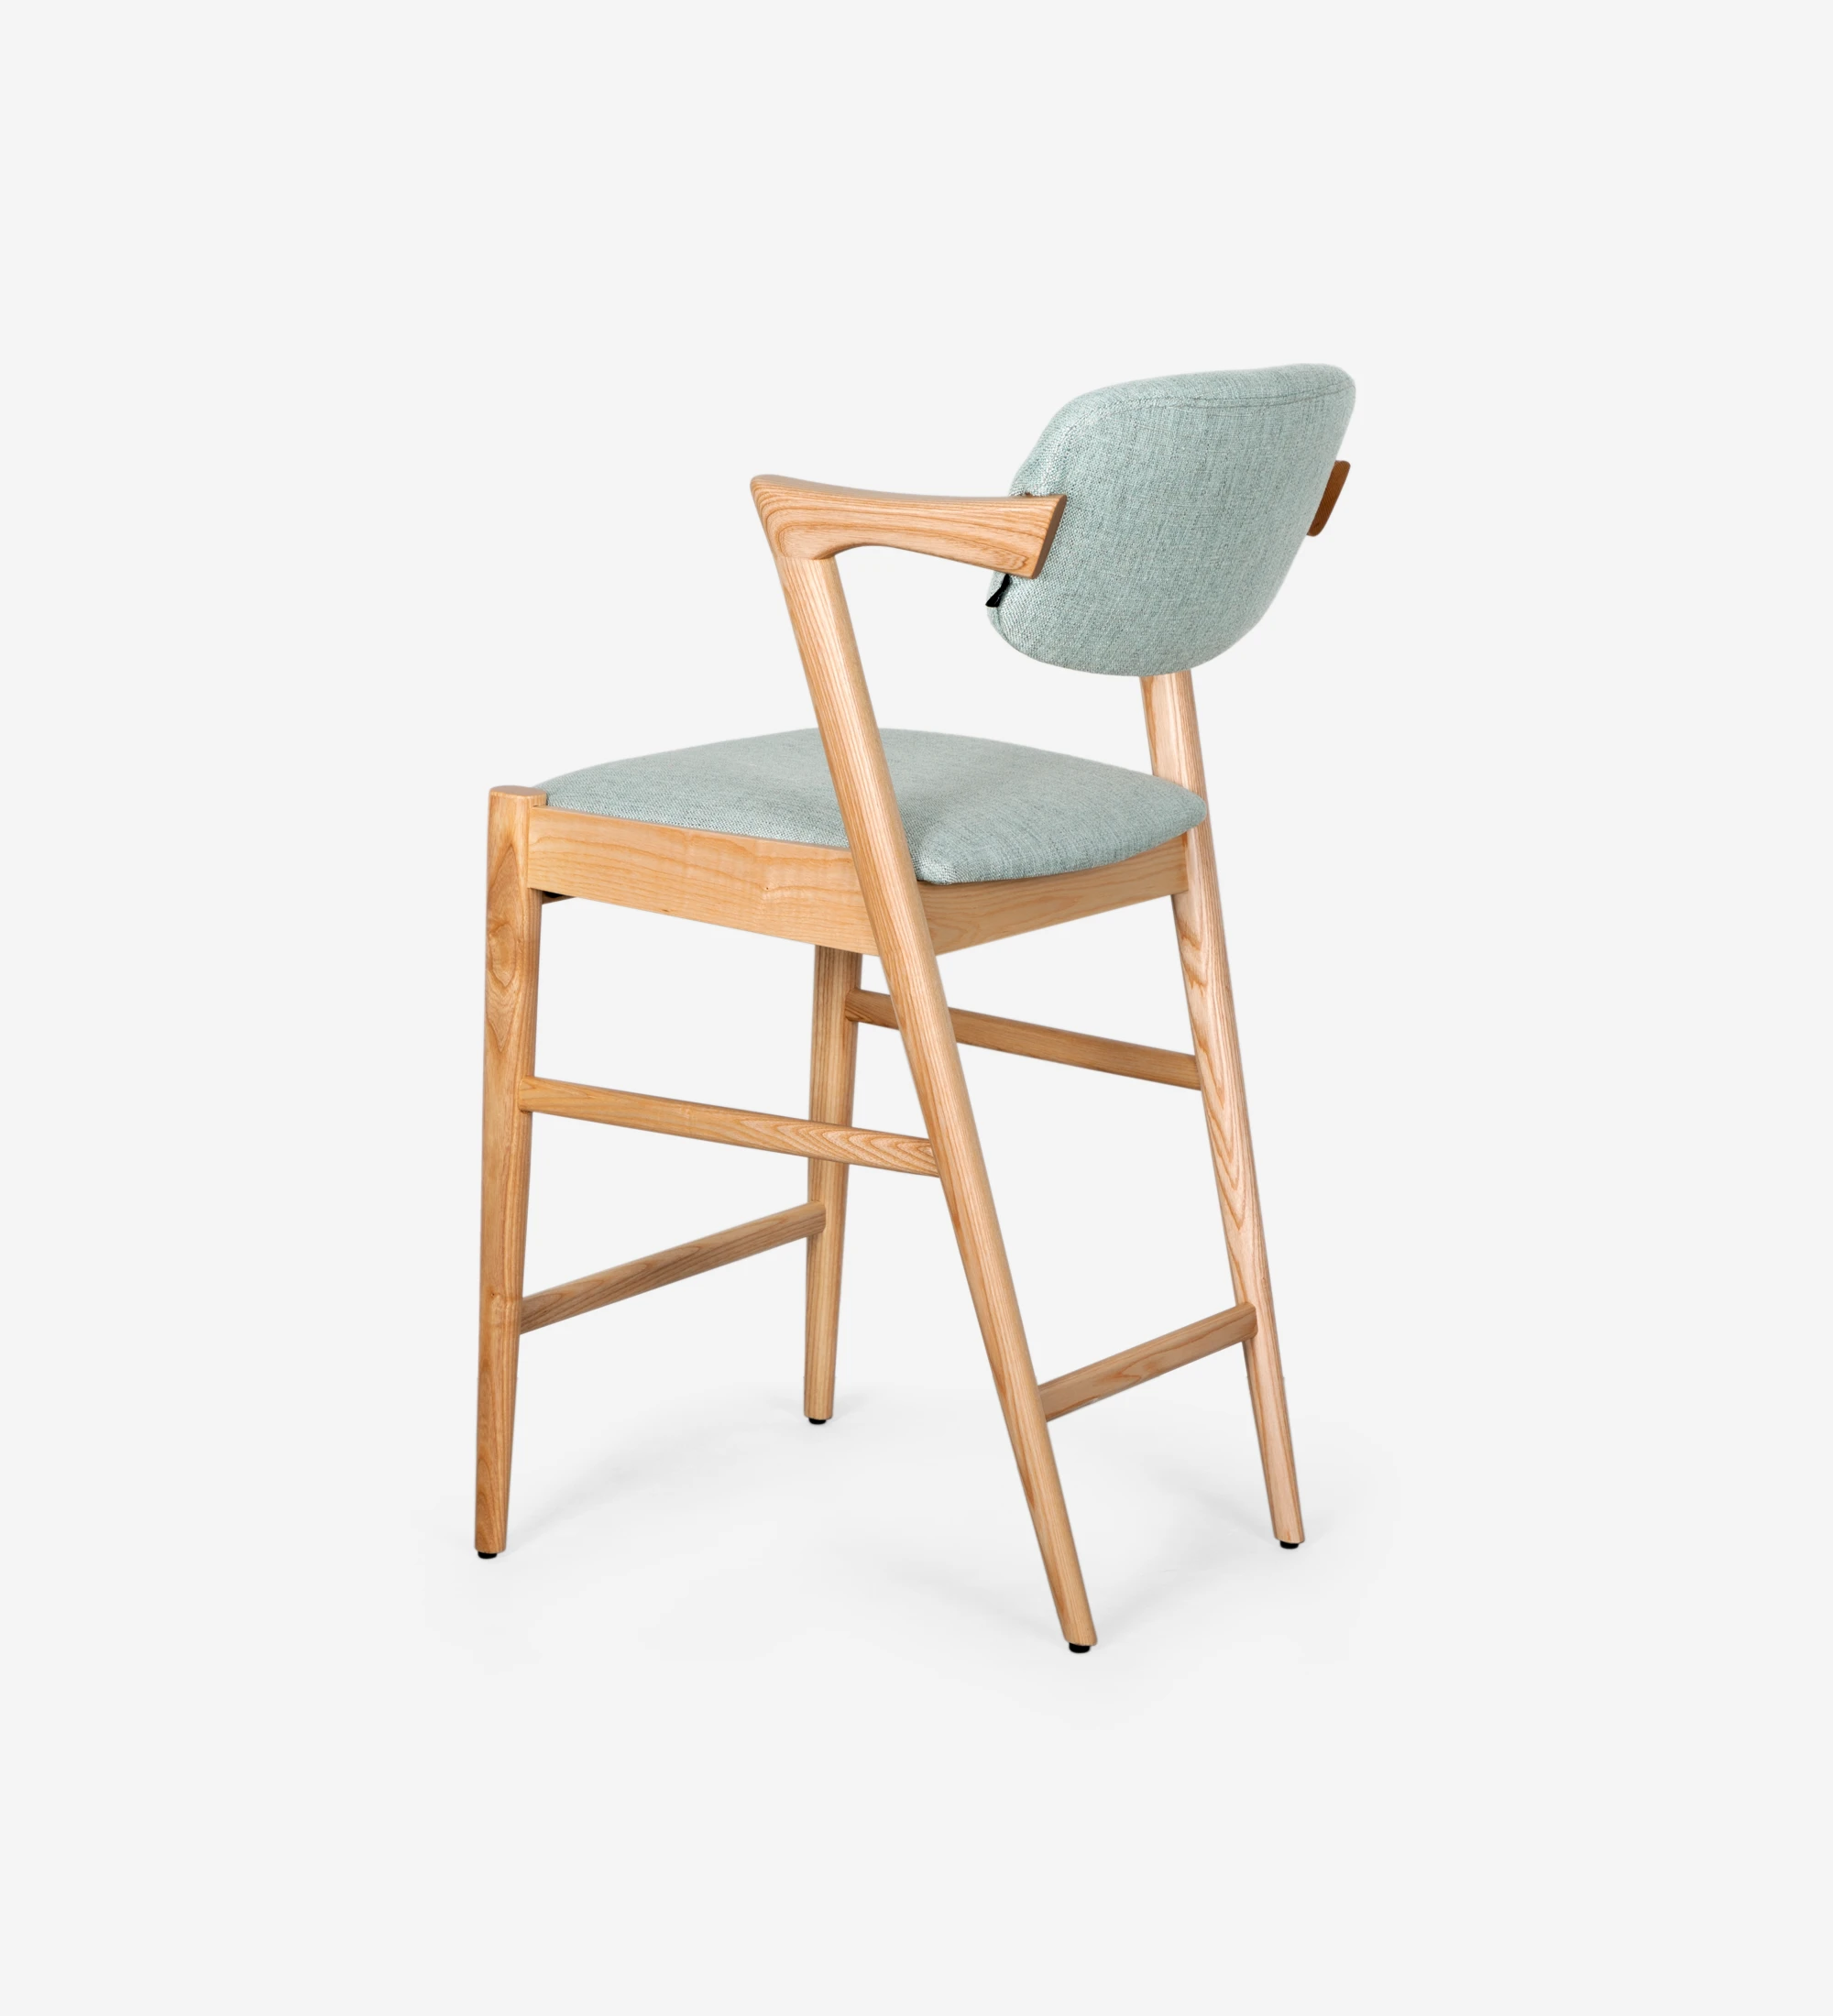 Stool in natural colored ash wood, with seat and back upholstered in fabric.